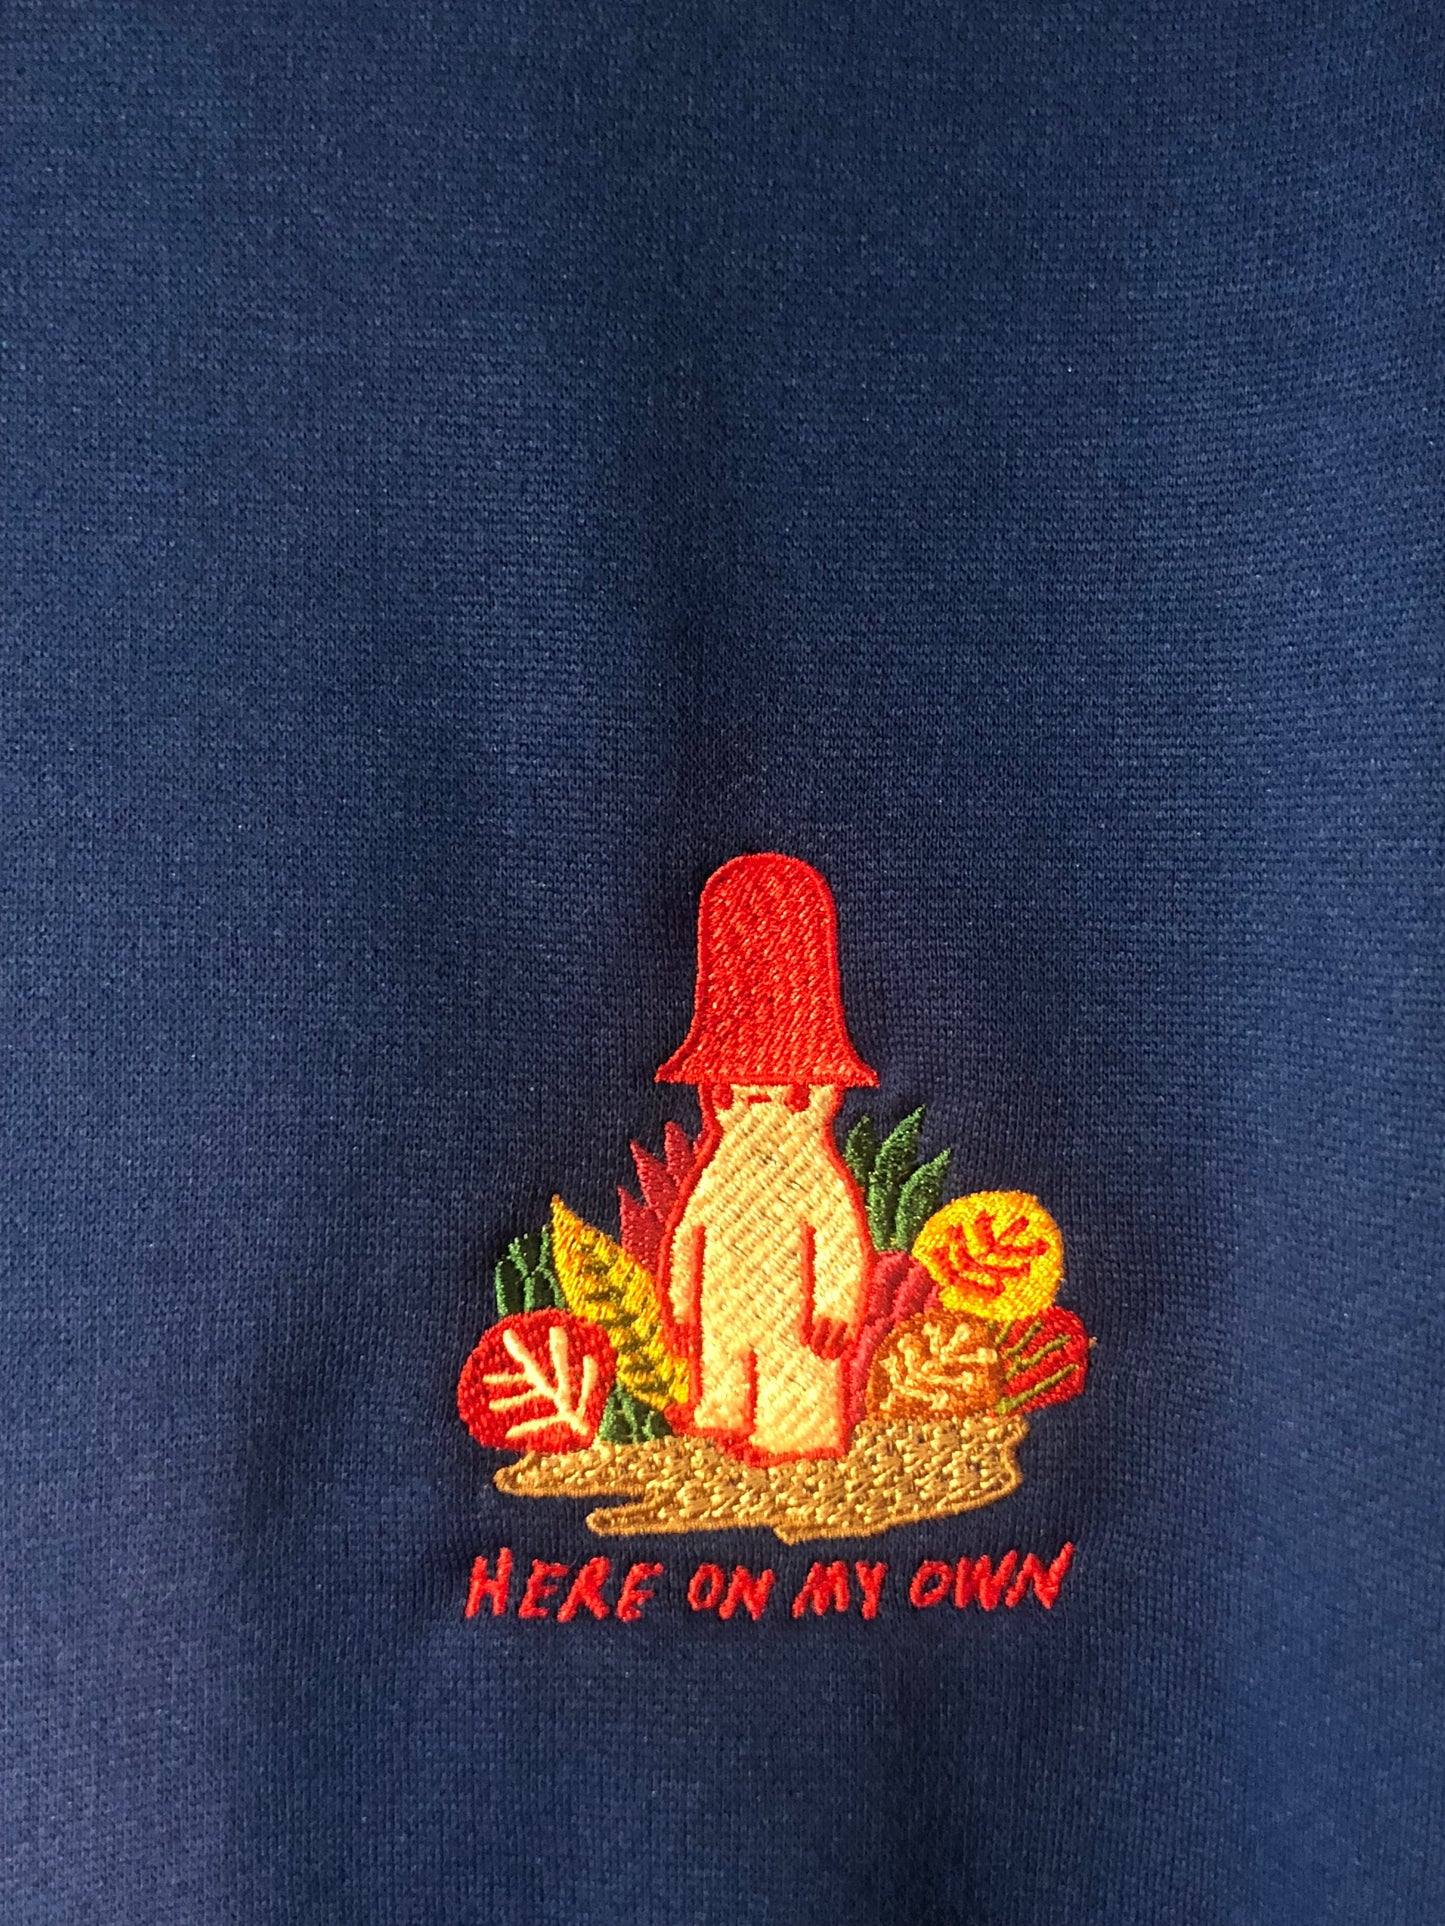 Here On My Own Crew Neck [SOLD OUT]